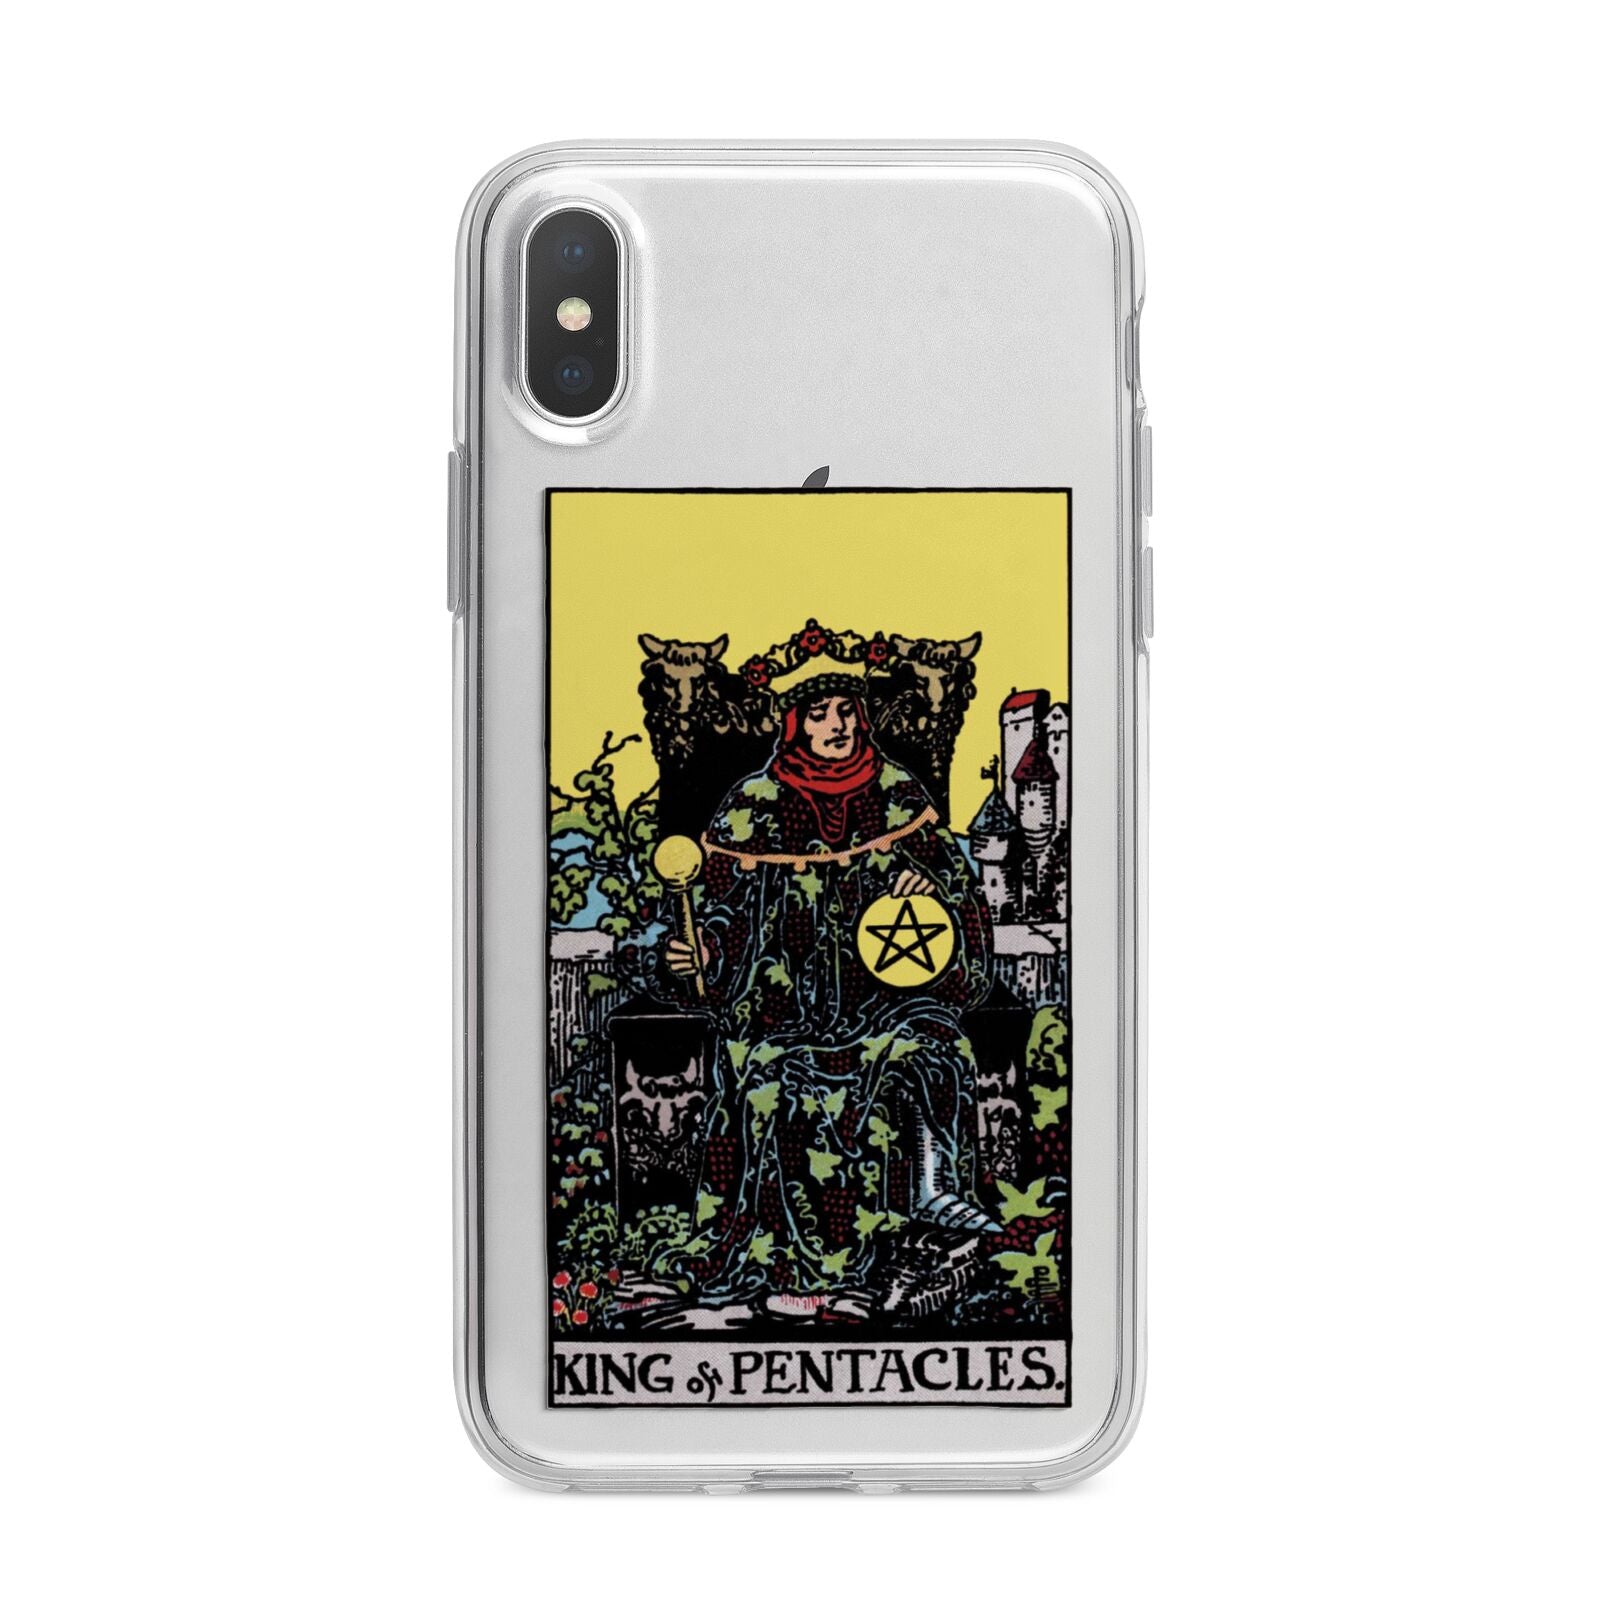 King of Pentacles Tarot Card iPhone X Bumper Case on Silver iPhone Alternative Image 1